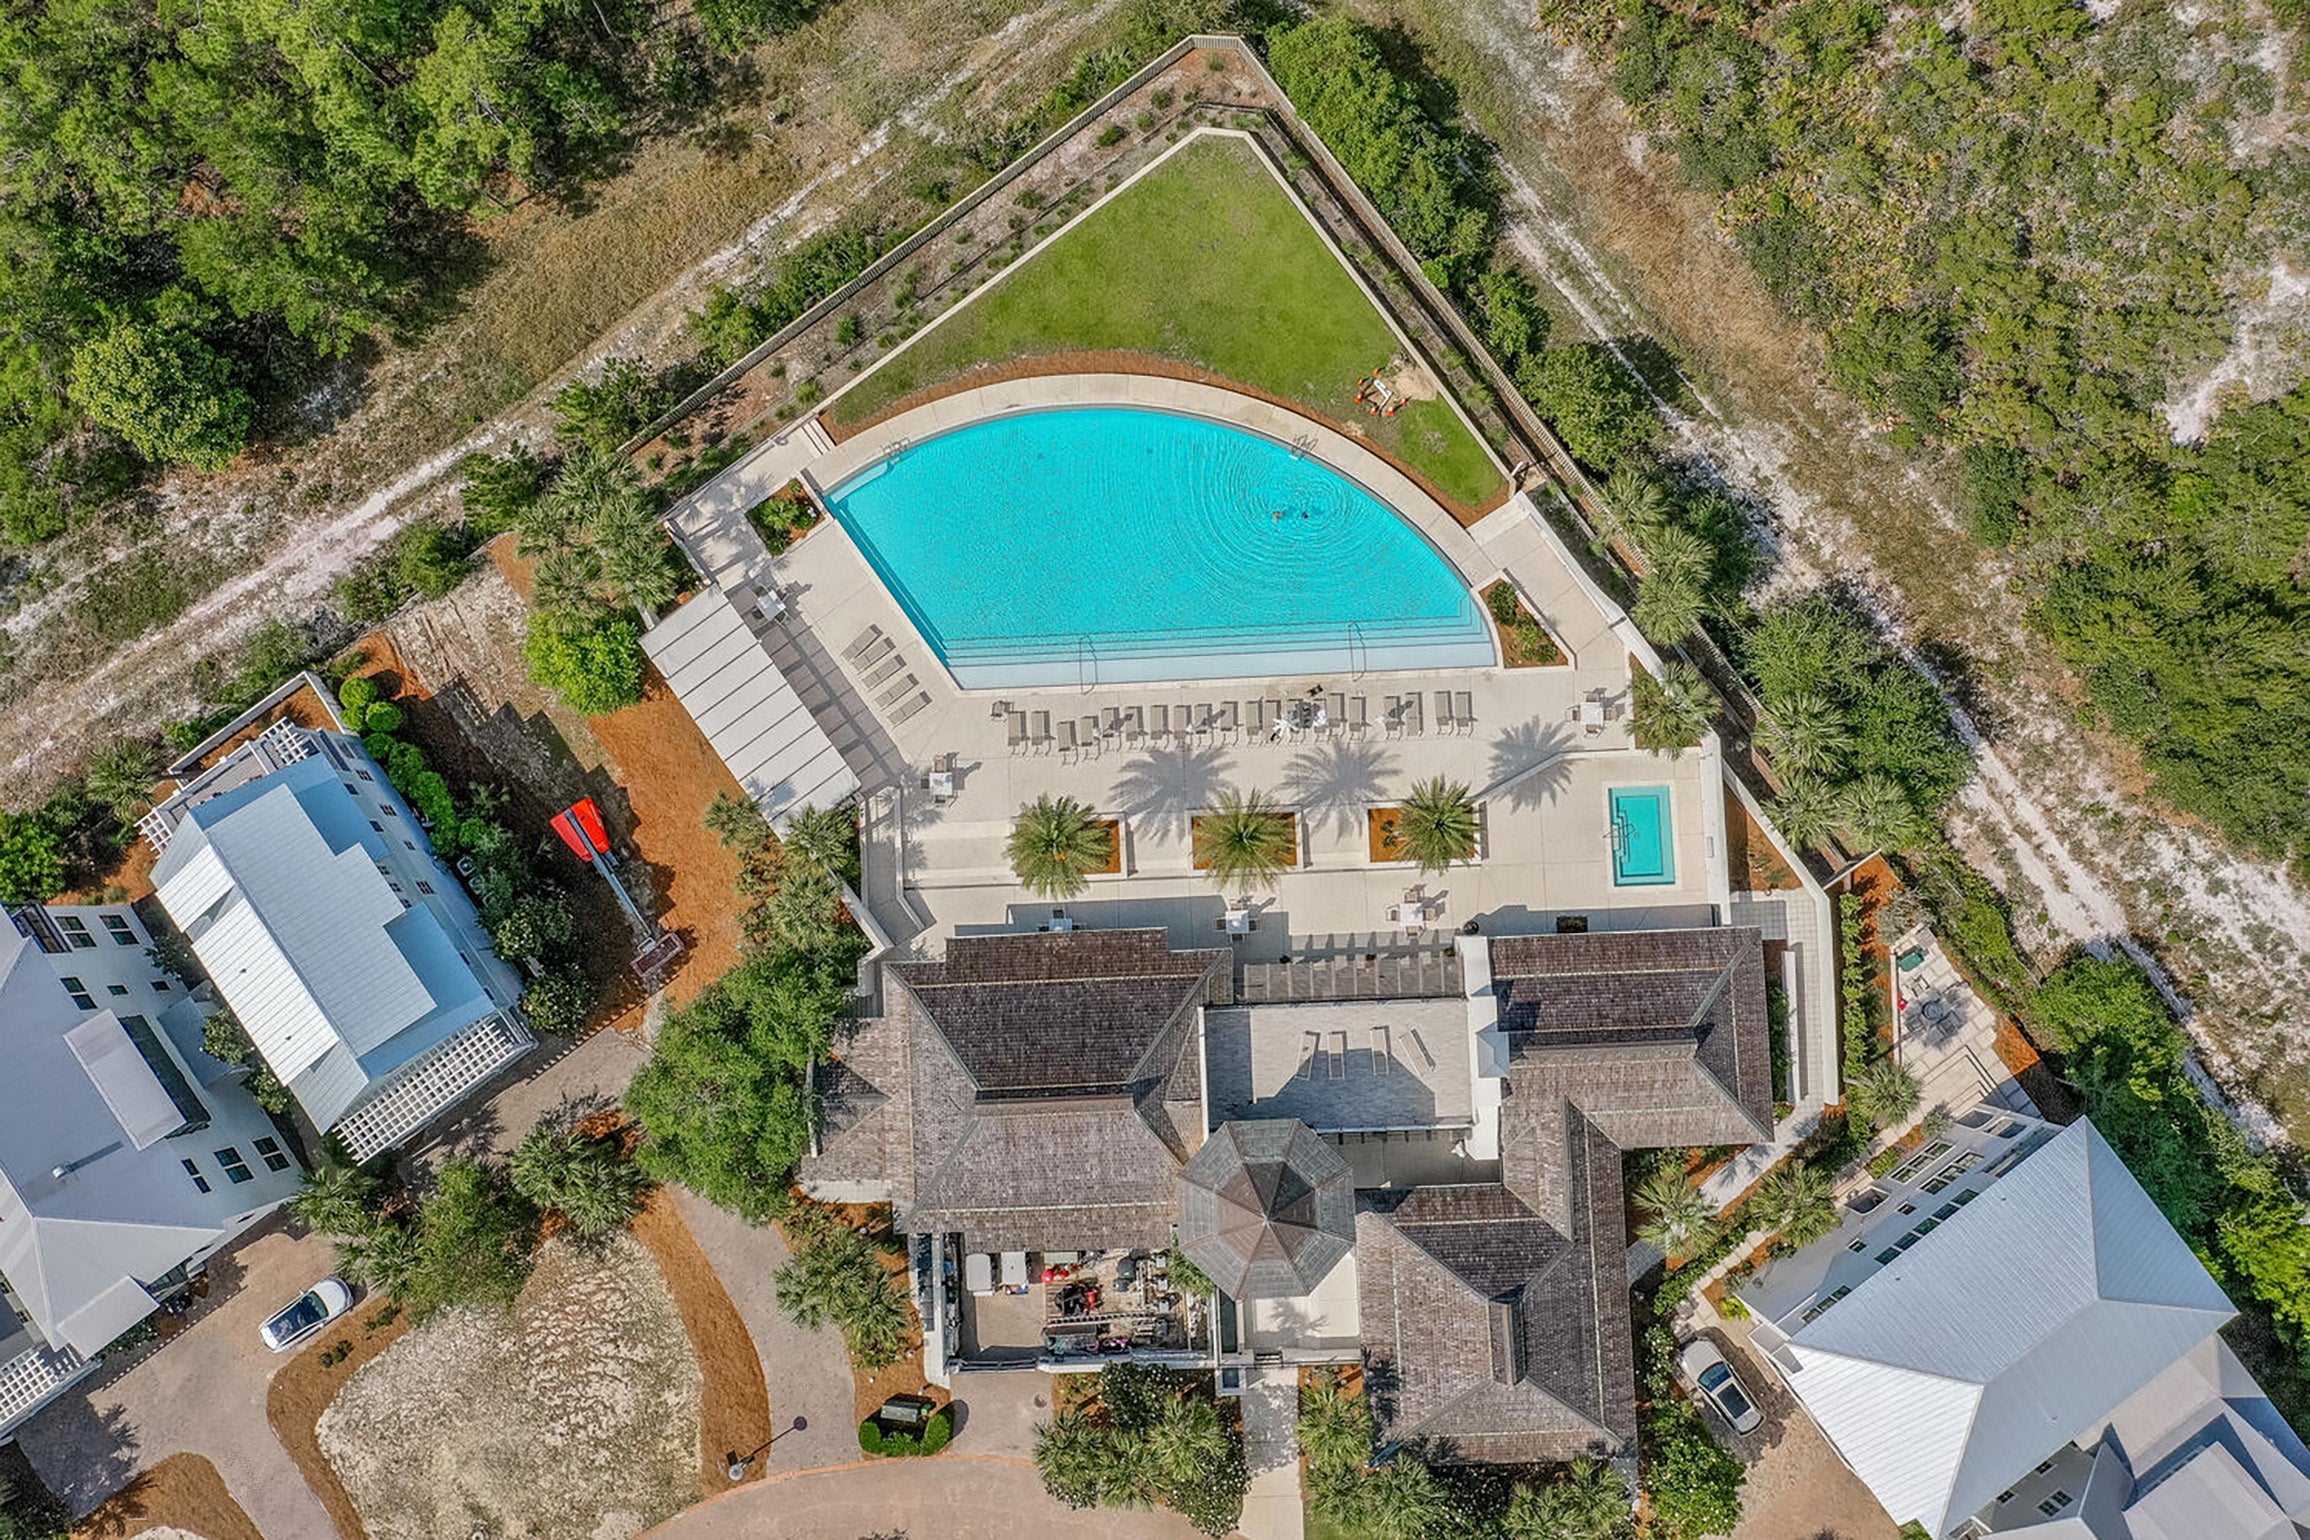 Aerial view of pool house